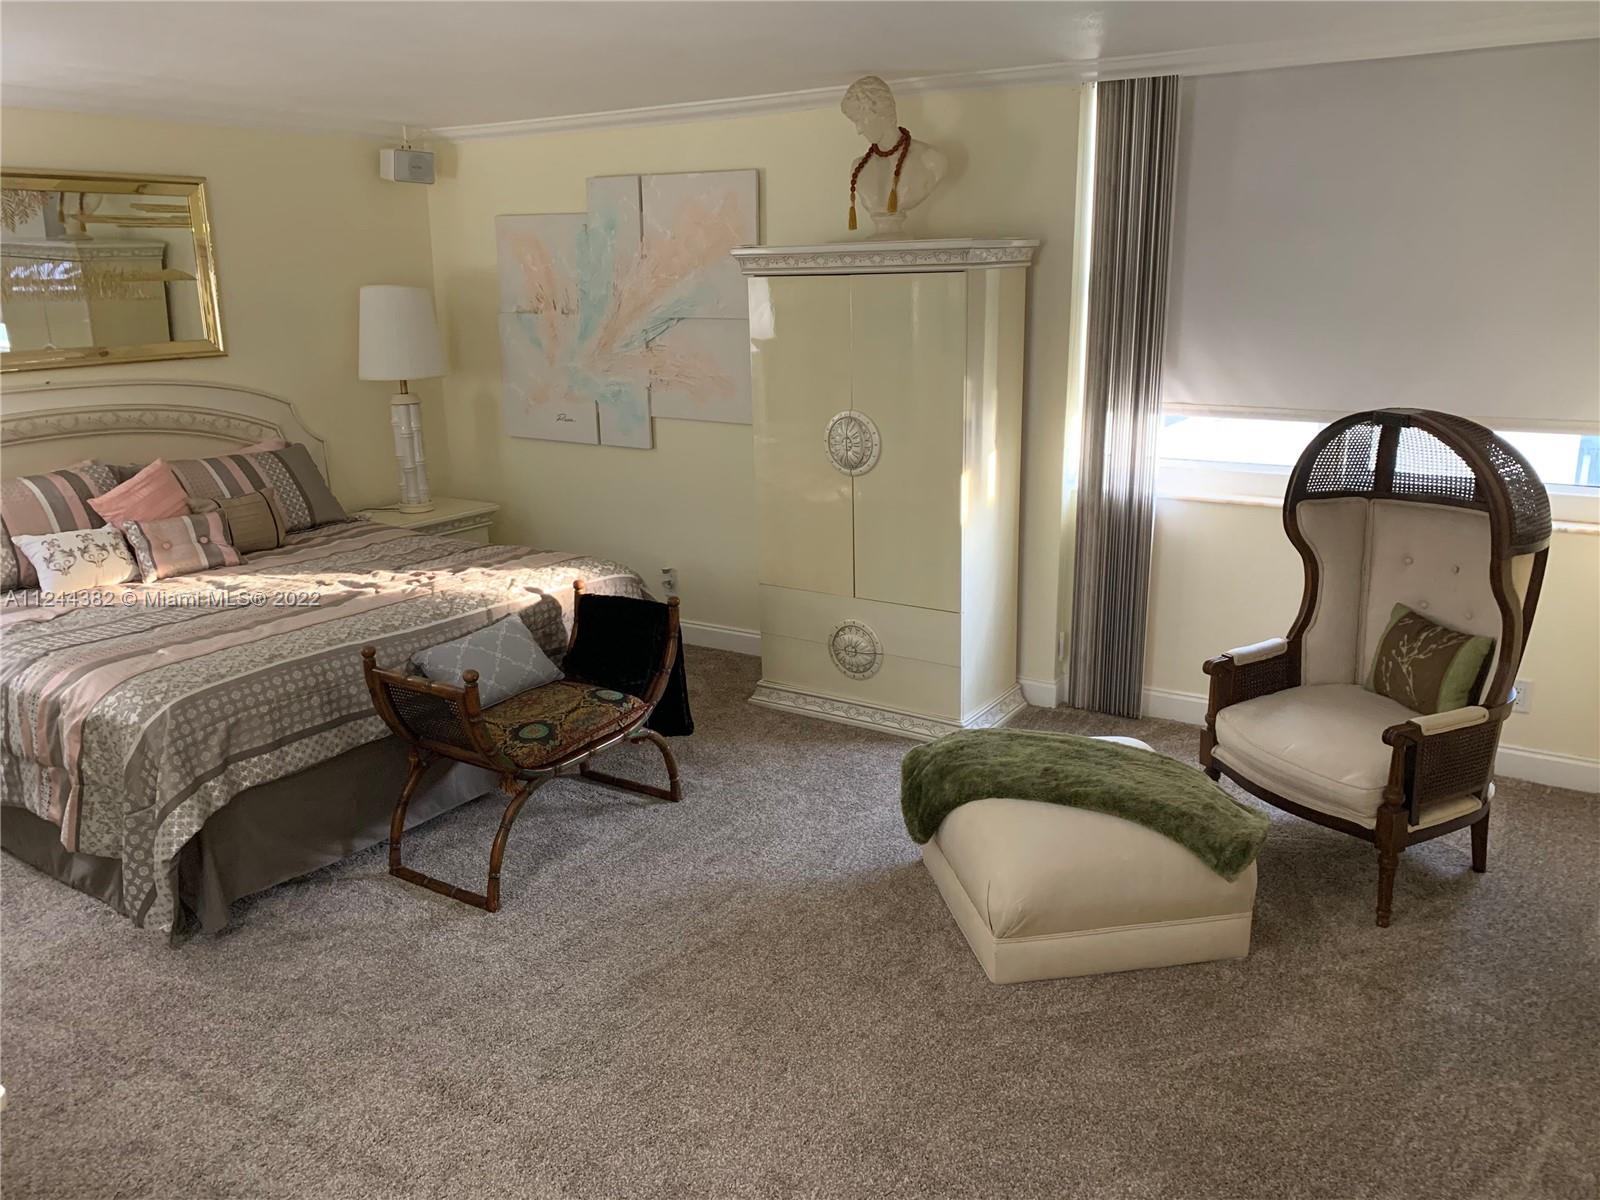 GRAND PLUS+ SIZED MASTER BEDROOM WITH KING SIZE BED AND SITTING AREA